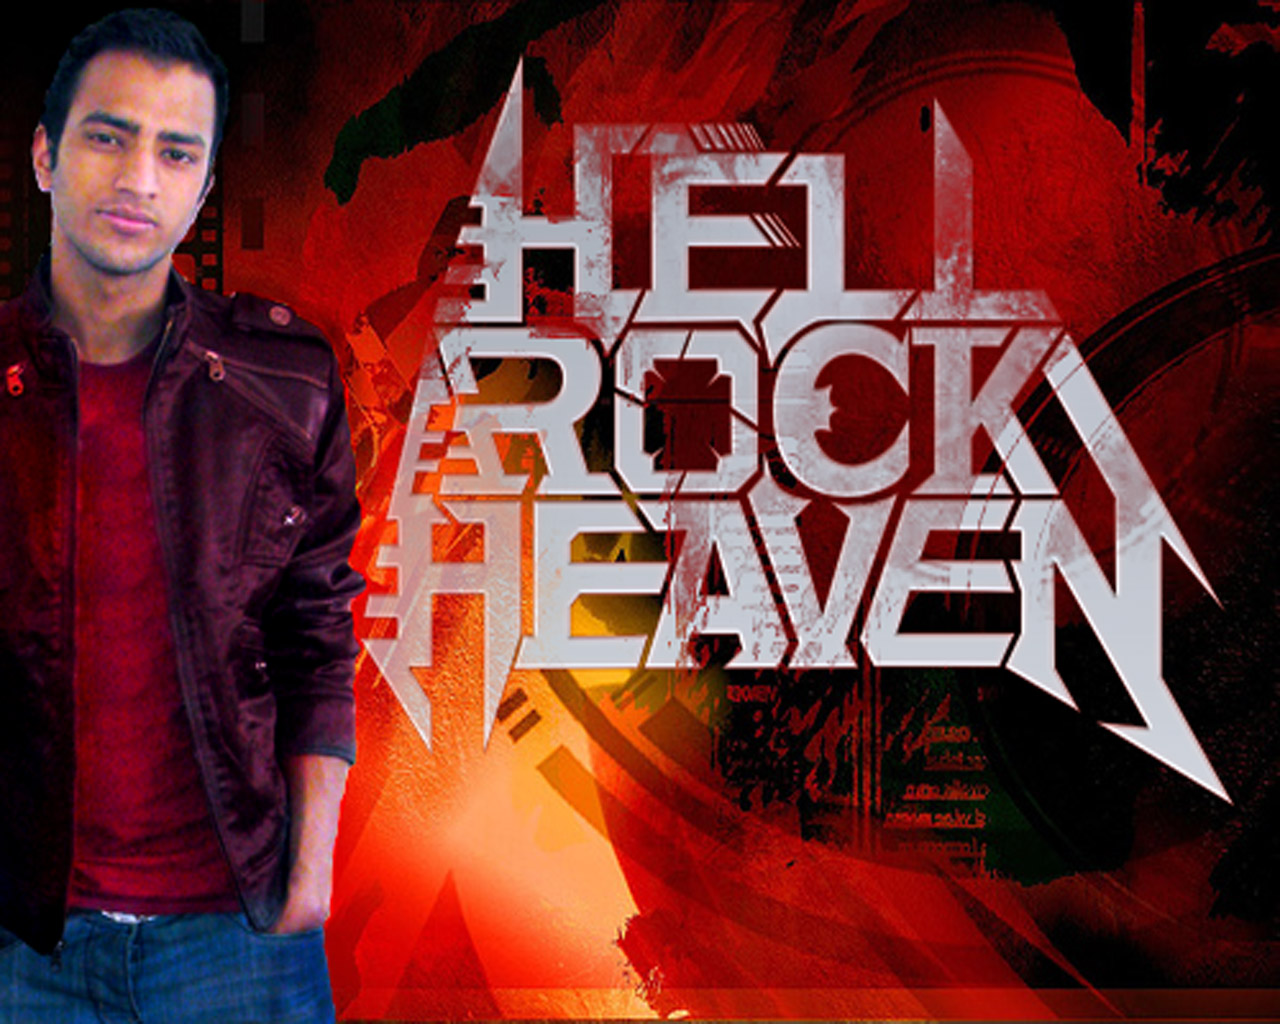 Hell Rock Heaven - Anup Panthi - Lead Guiatrist (H.R.H)